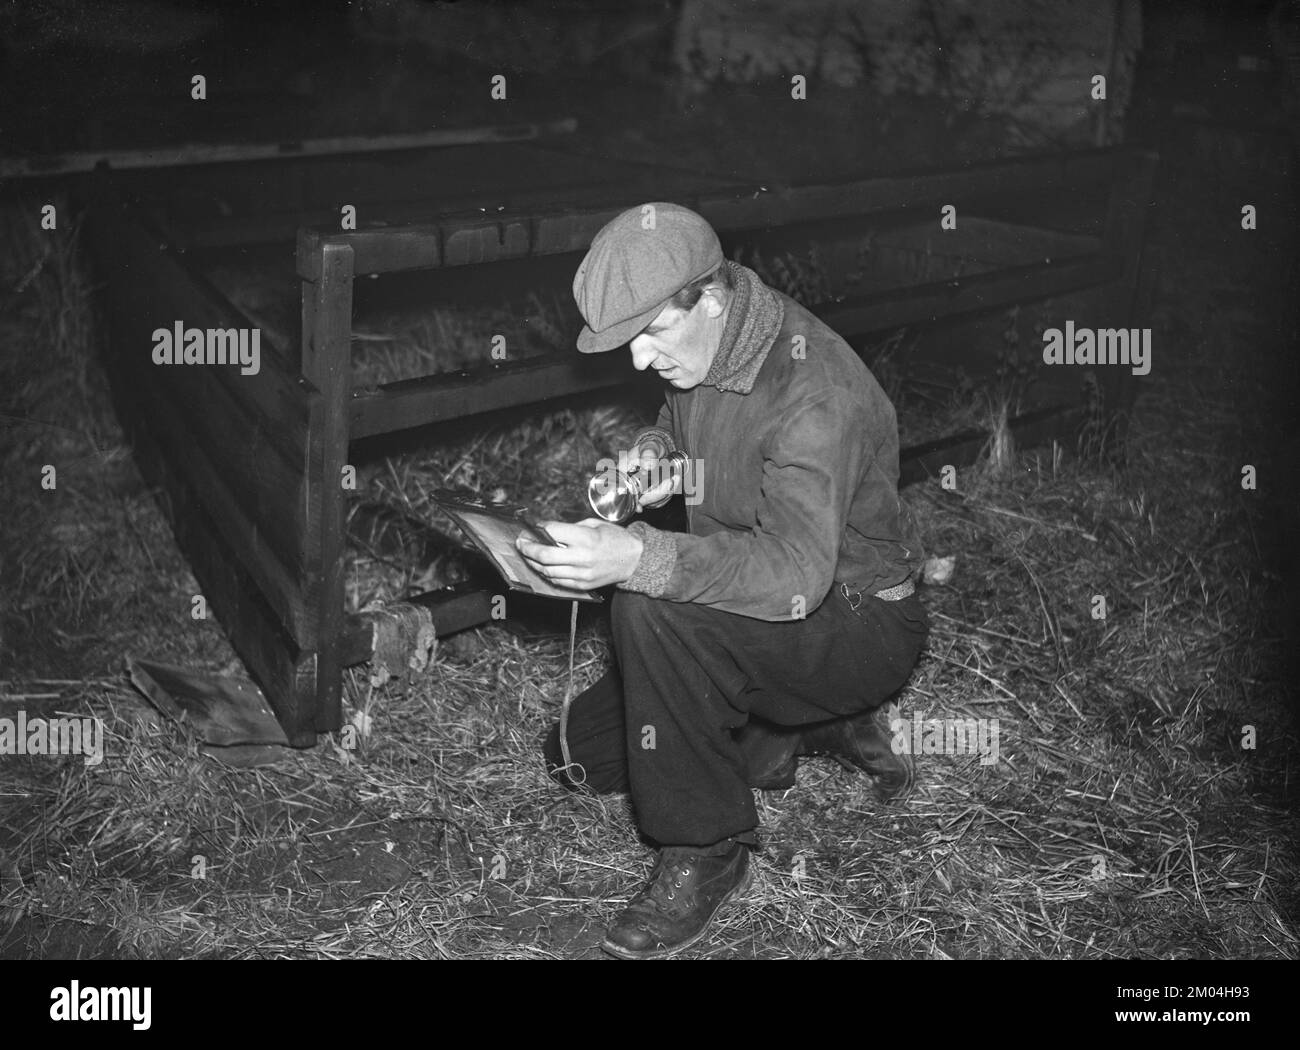 In the 1930s. A man pictured during a orienteering competition at night, studying the map in the light of his flashlight to find the control points and the fastest way through the course. Sweden 12 november 1939. Kristoffersson ref 11-4 Stock Photo